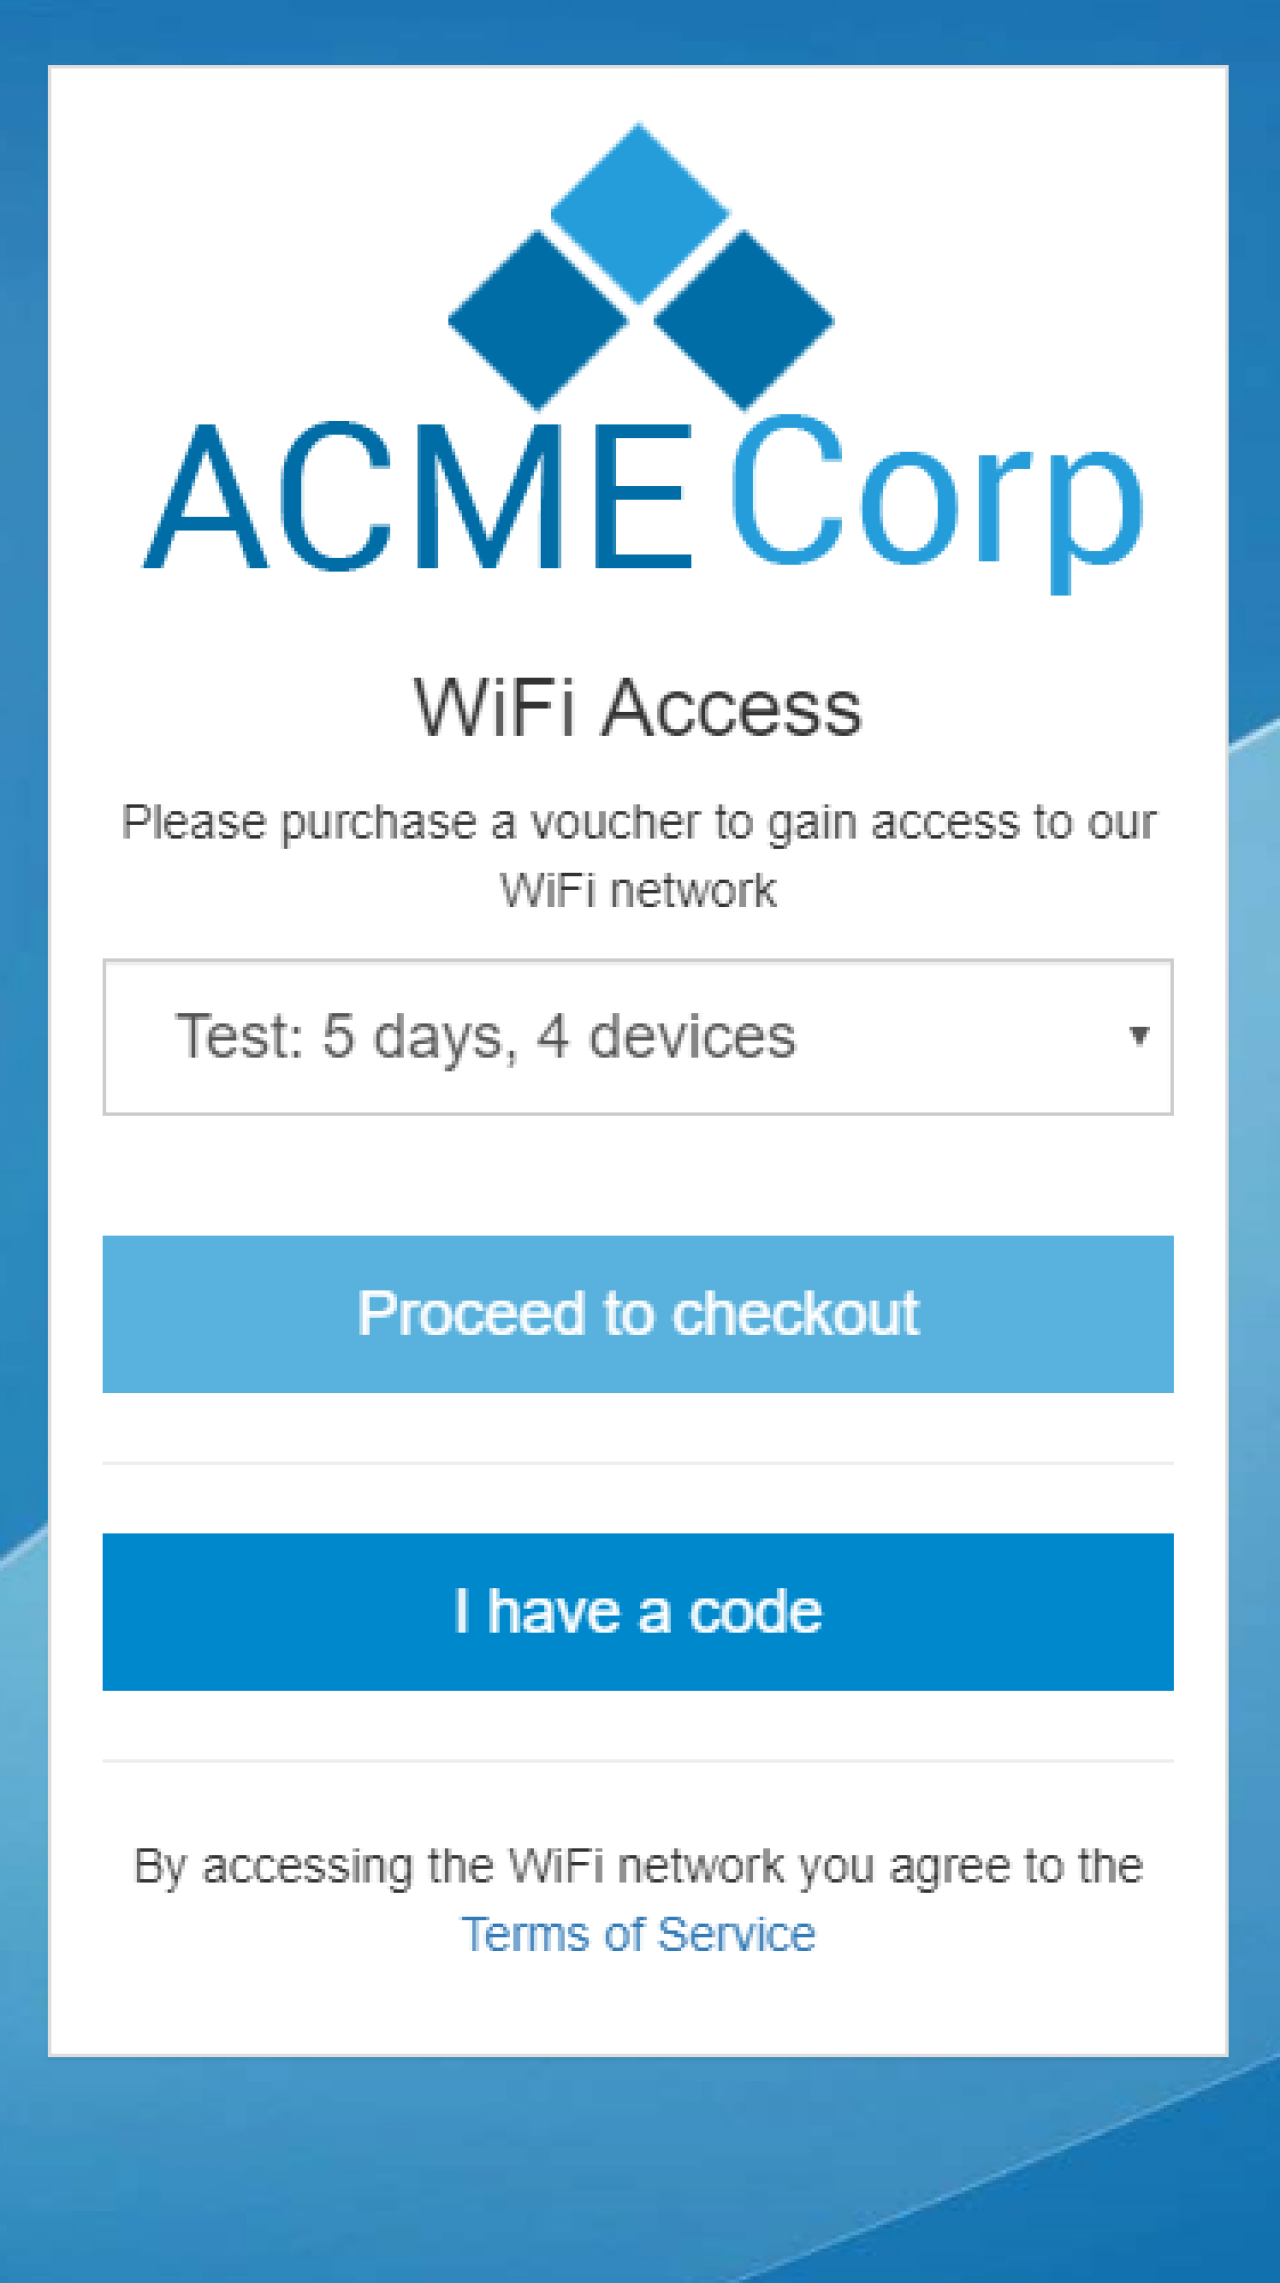 Captive portal with Stripe support.